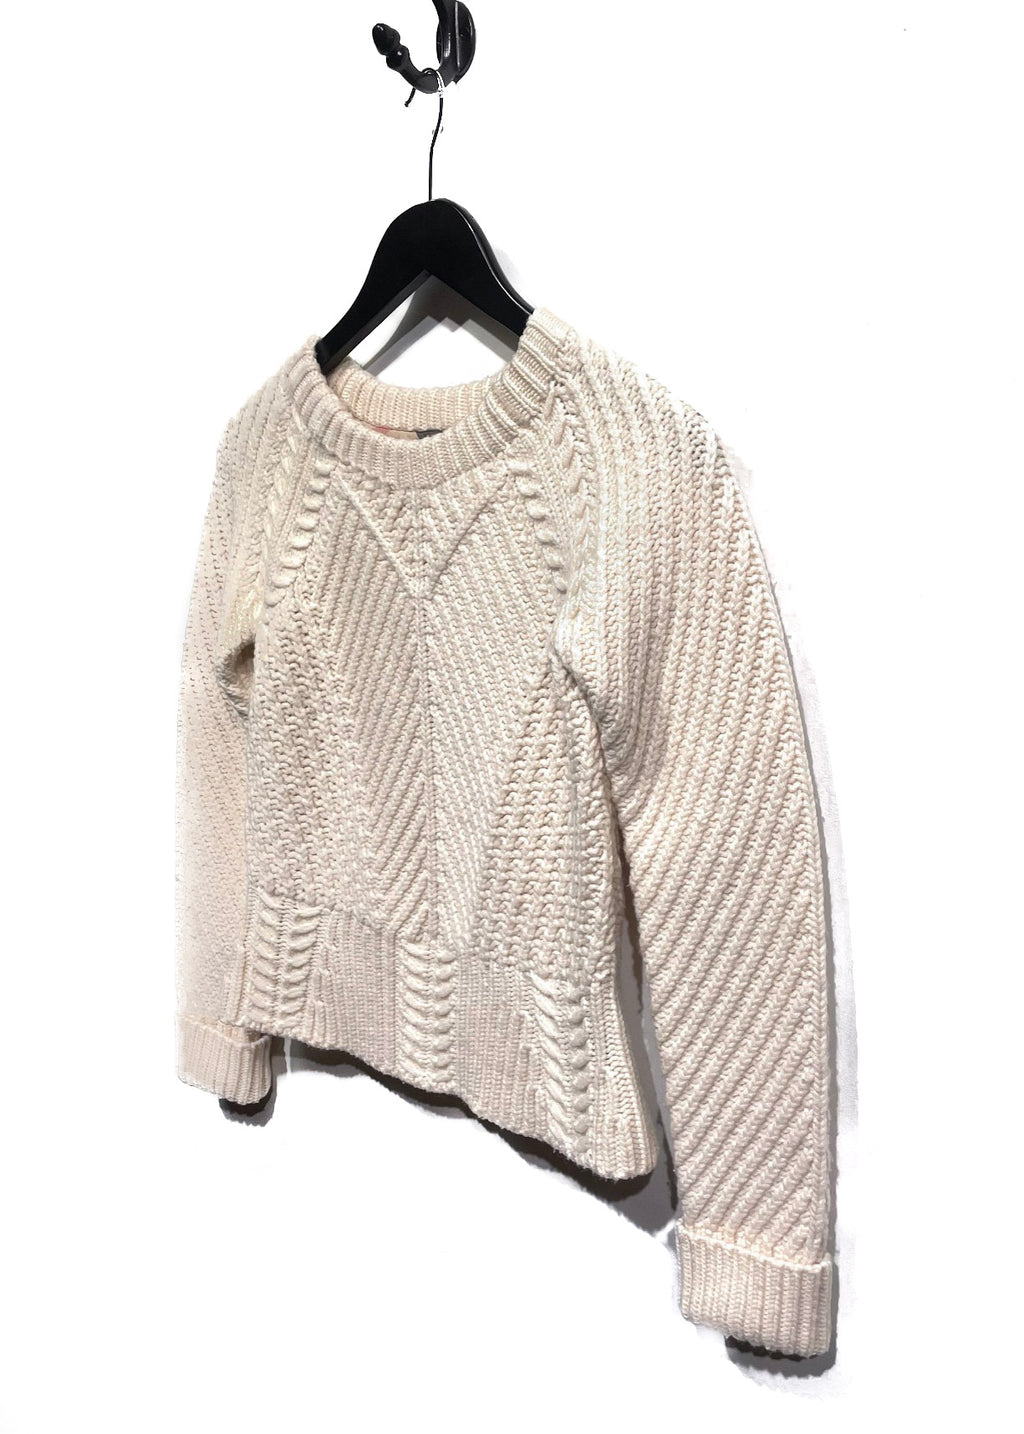 Burberry Brit Ivory Chunky Knit Sweater